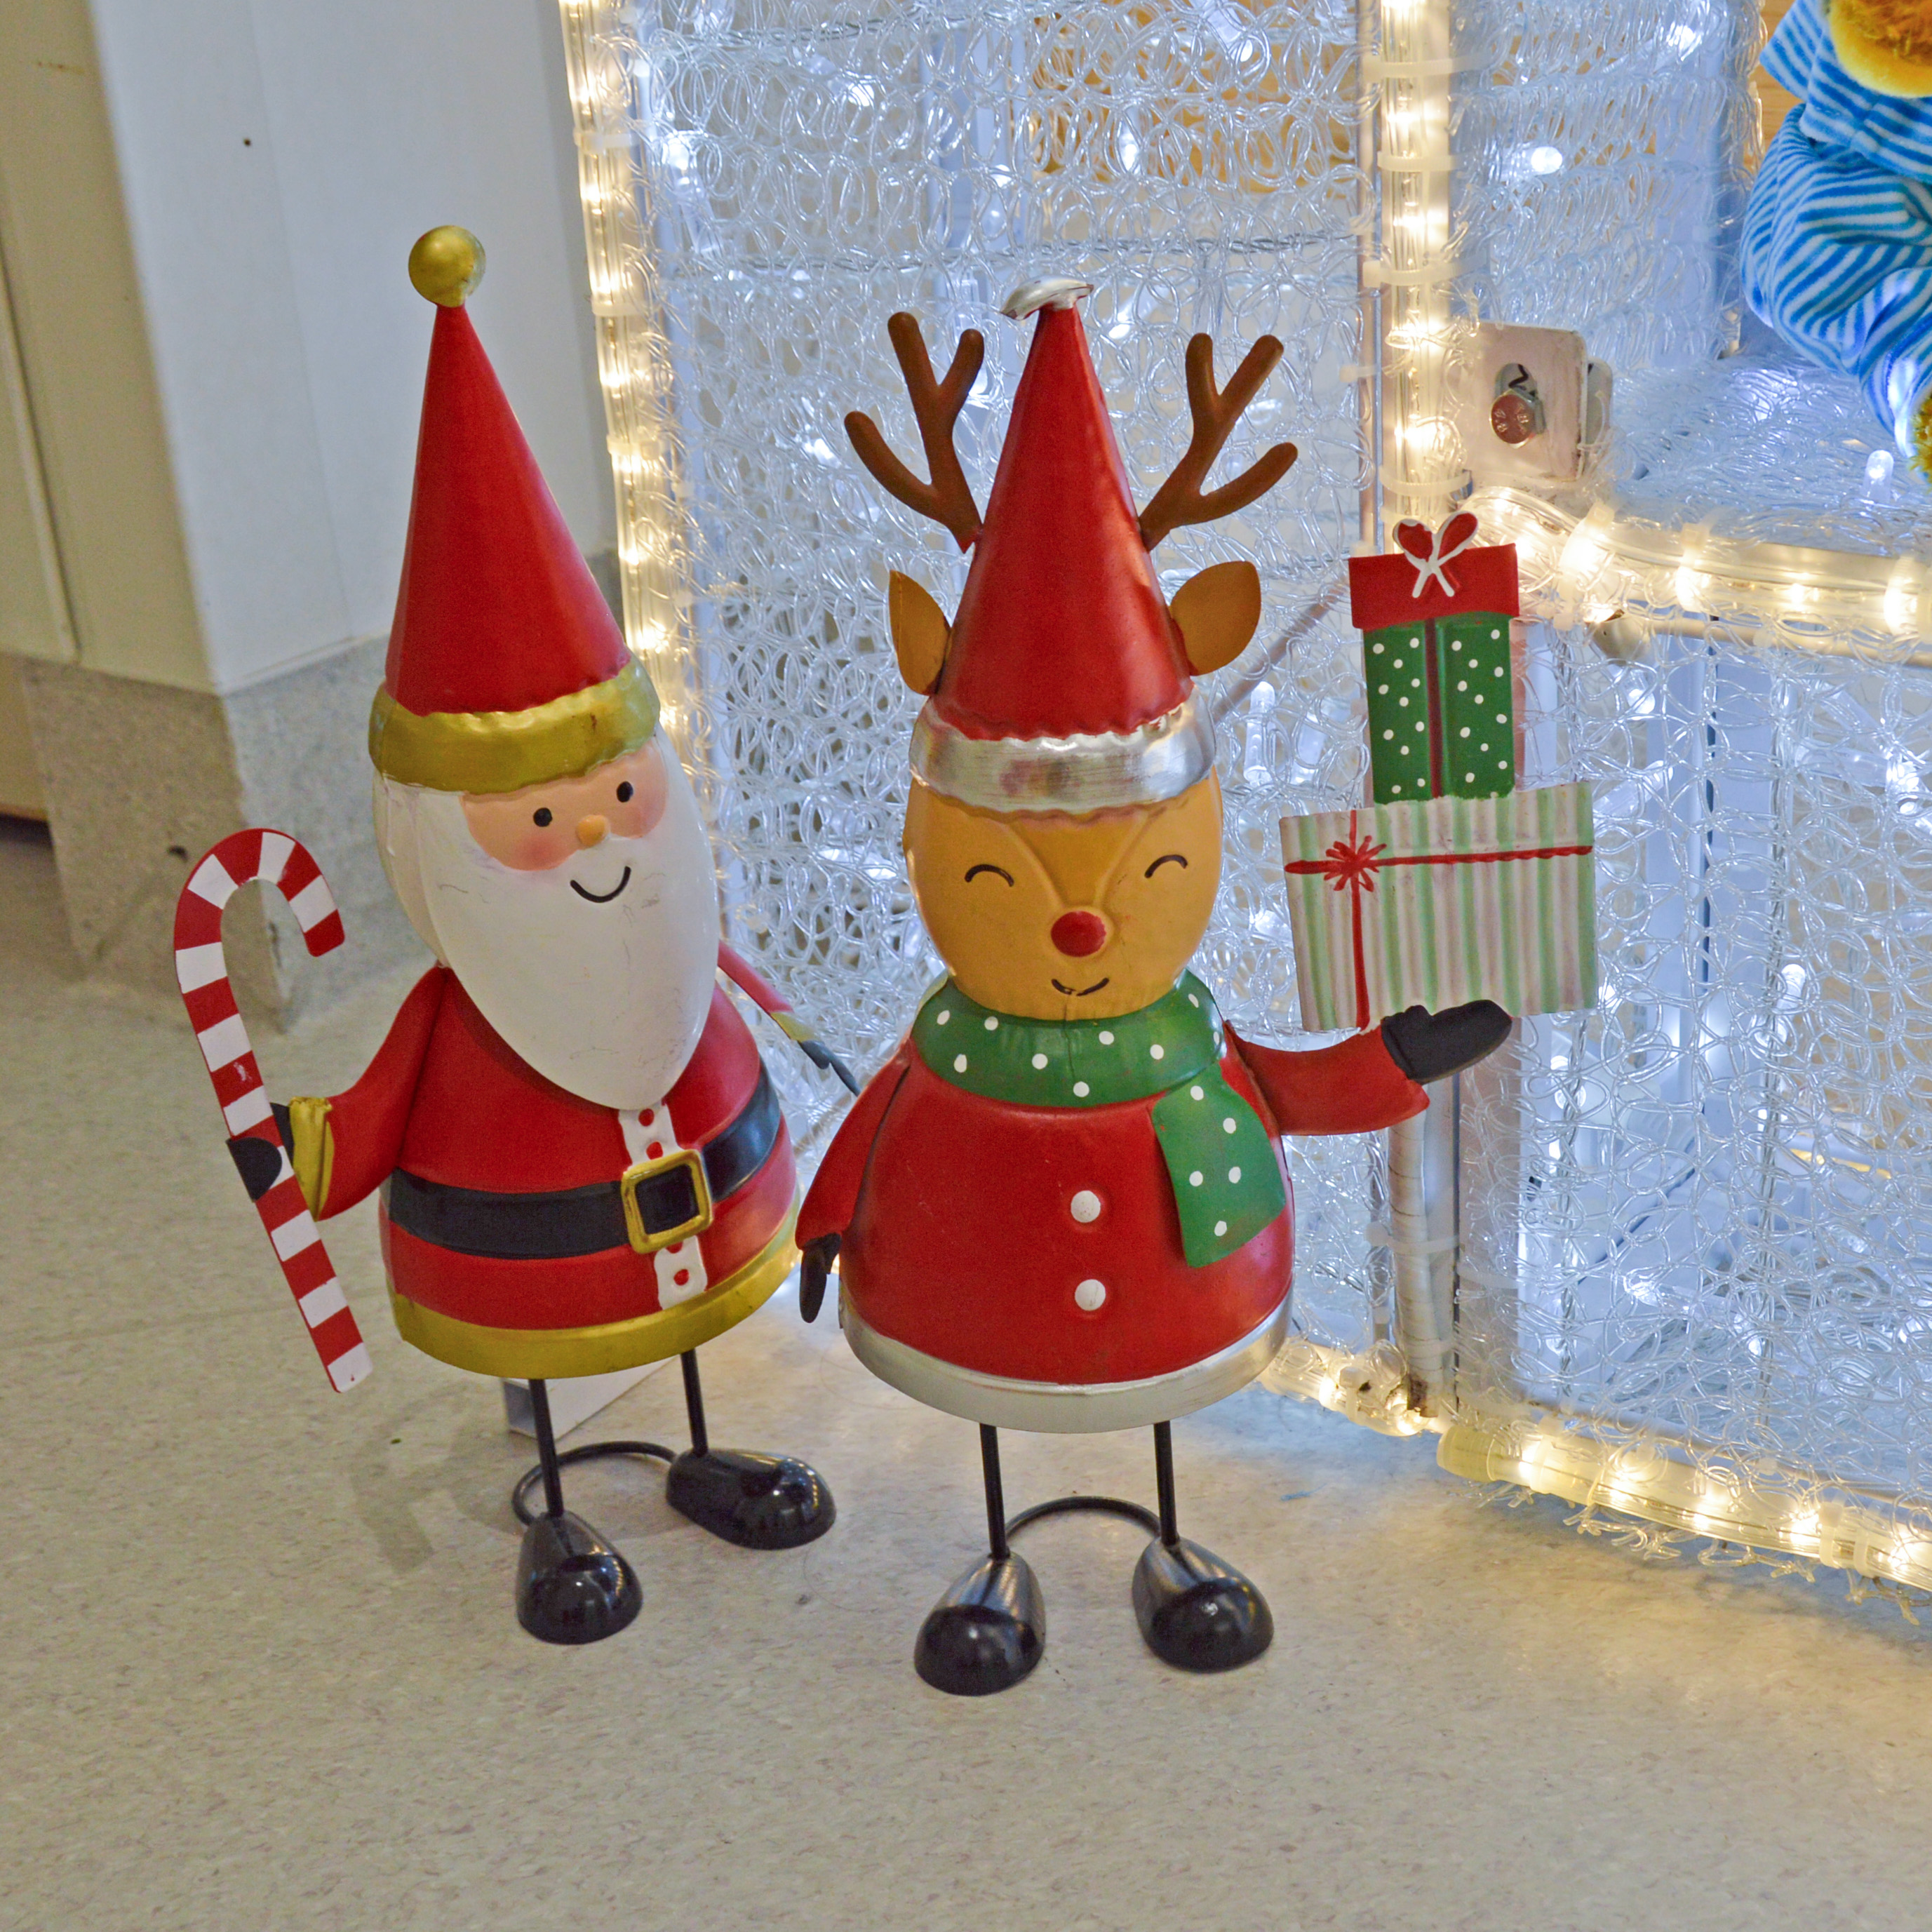 Christmas decoration in Perth Children's Hospital, a Santa figurine stands next to a reindeer statue